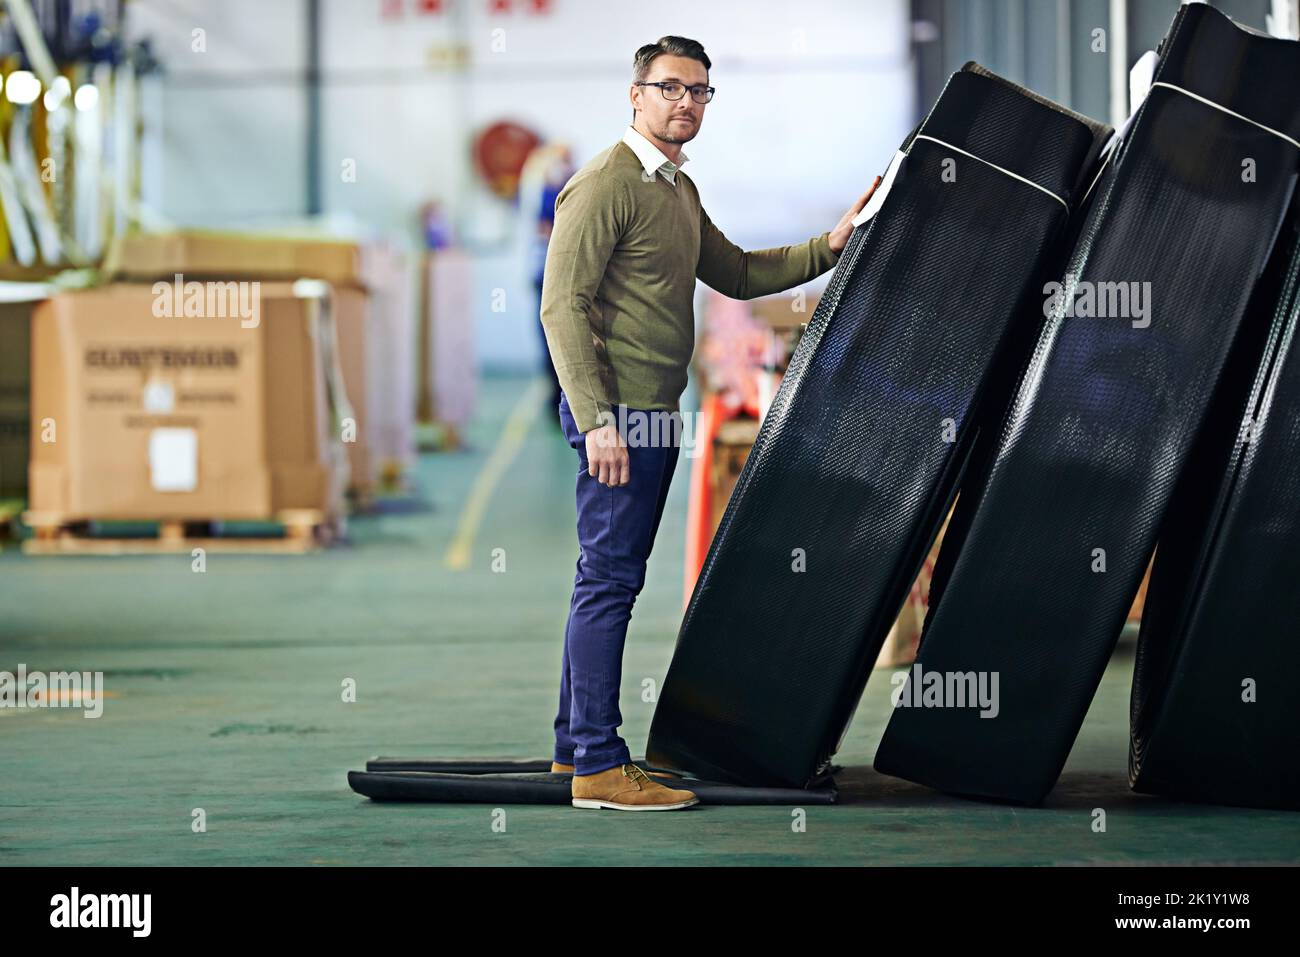 Our product cant be beaten. a man standing next to large coils of plastic in a large warehouse. Stock Photo